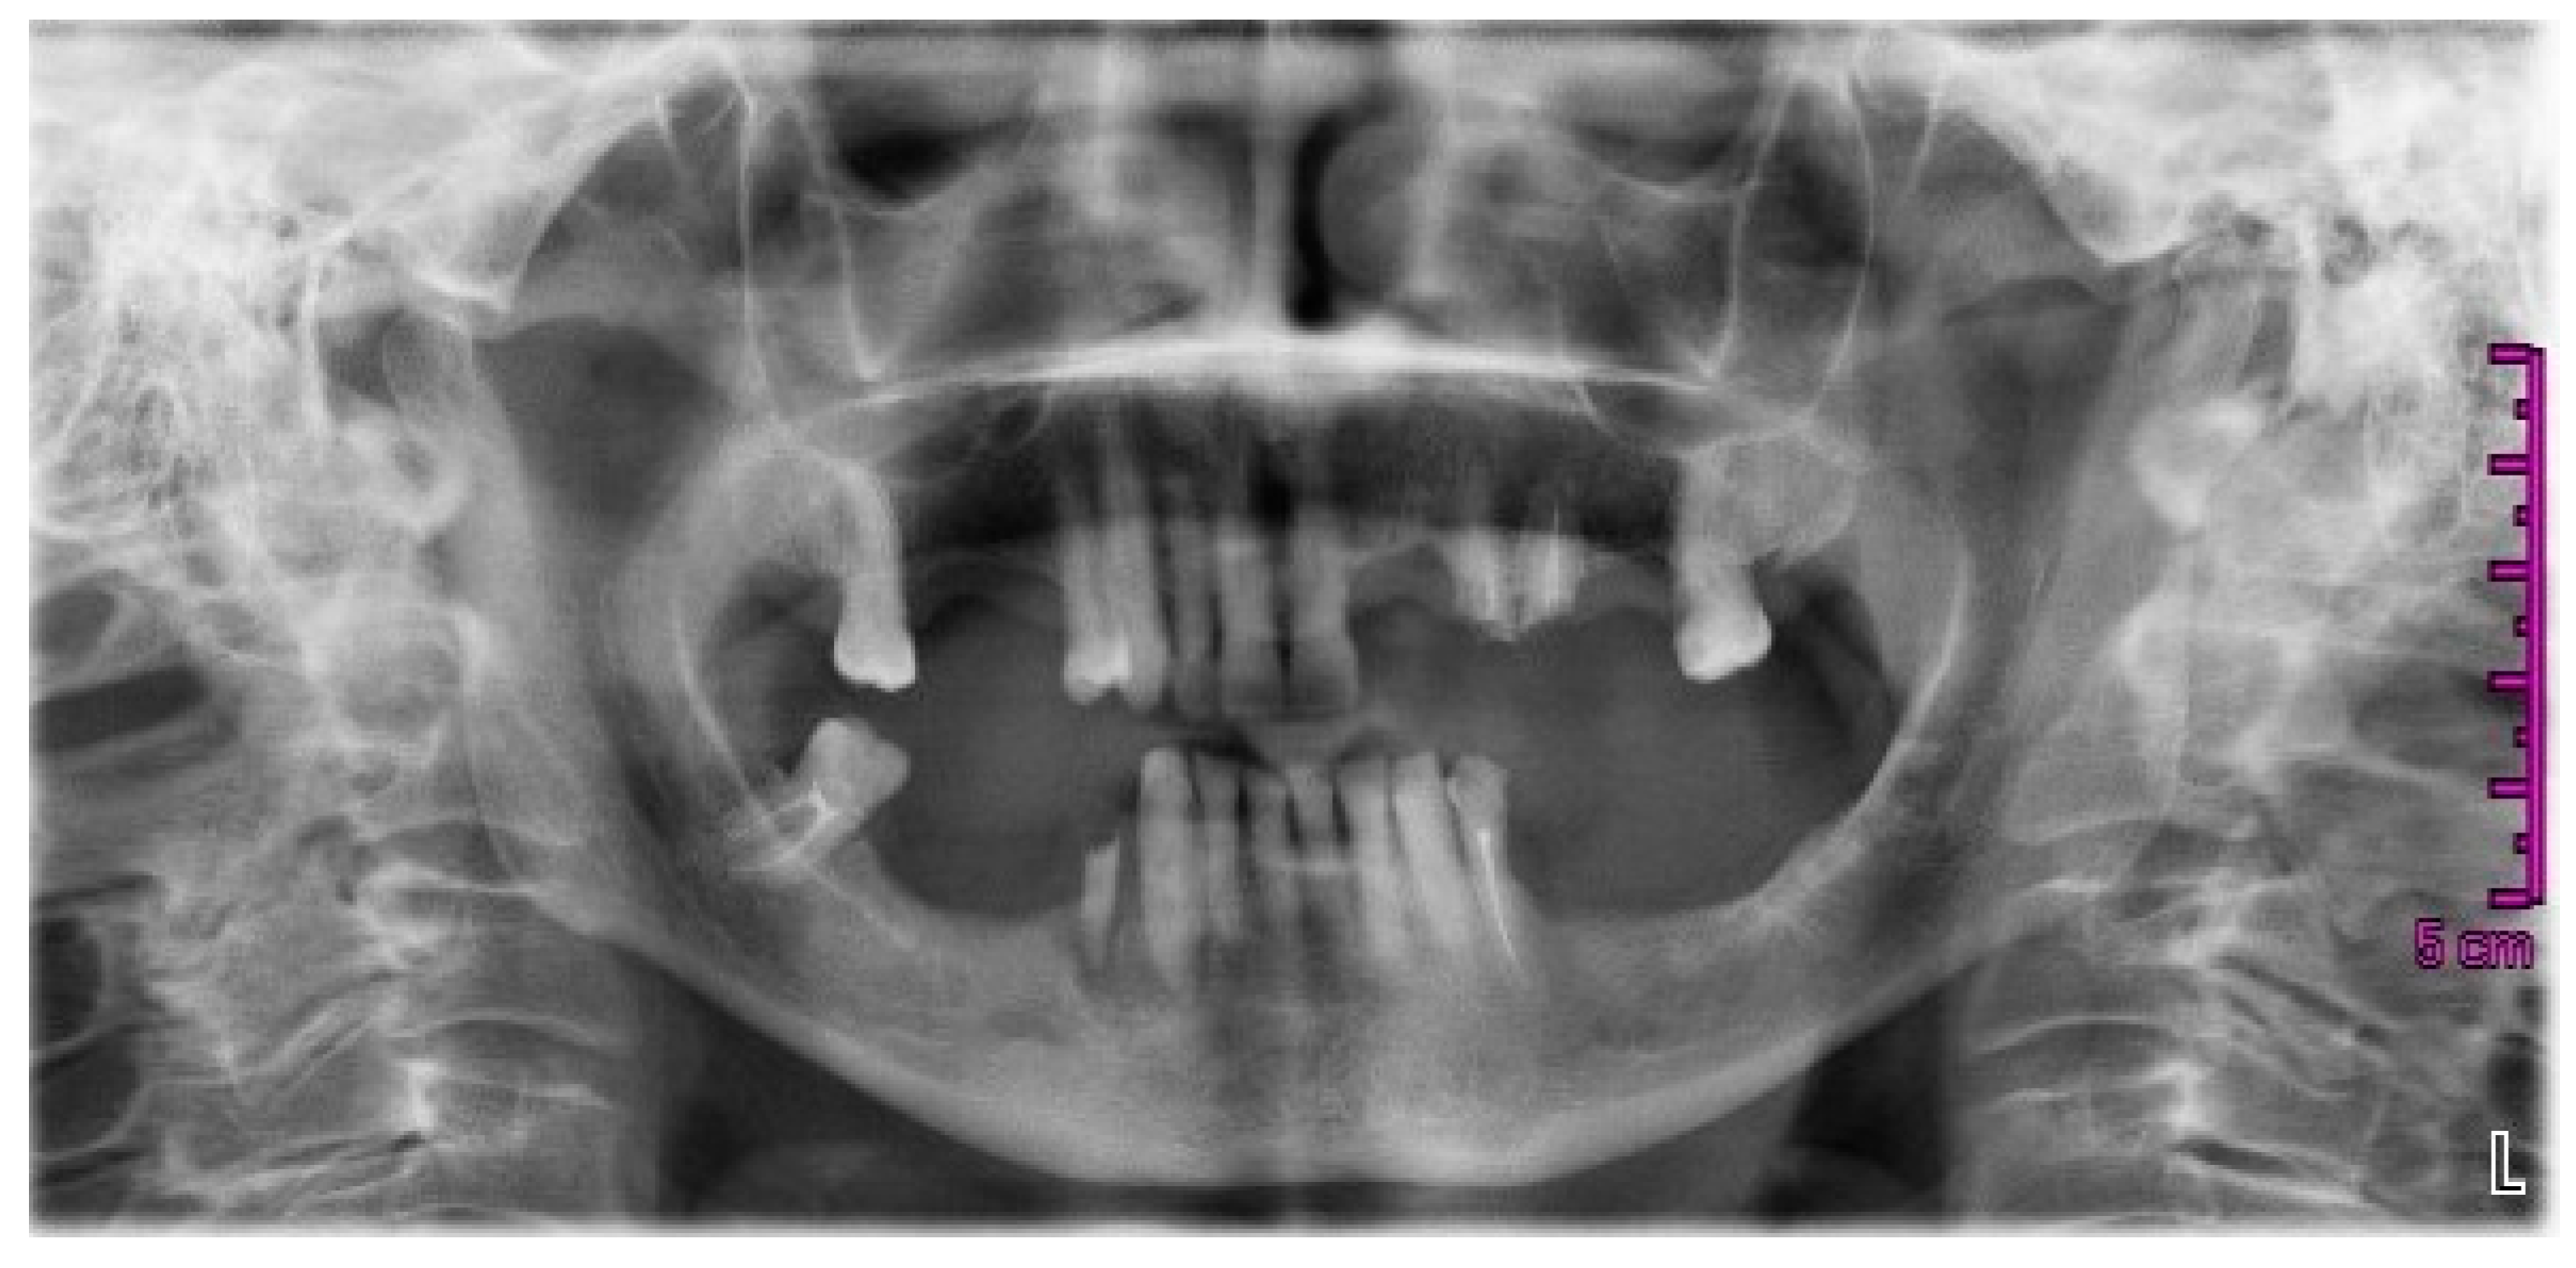 Dentistry Journal | Free Full-Text | Osteonecrosis of the Jaw (ONJ) in Osteoporosis ...3024 x 1488